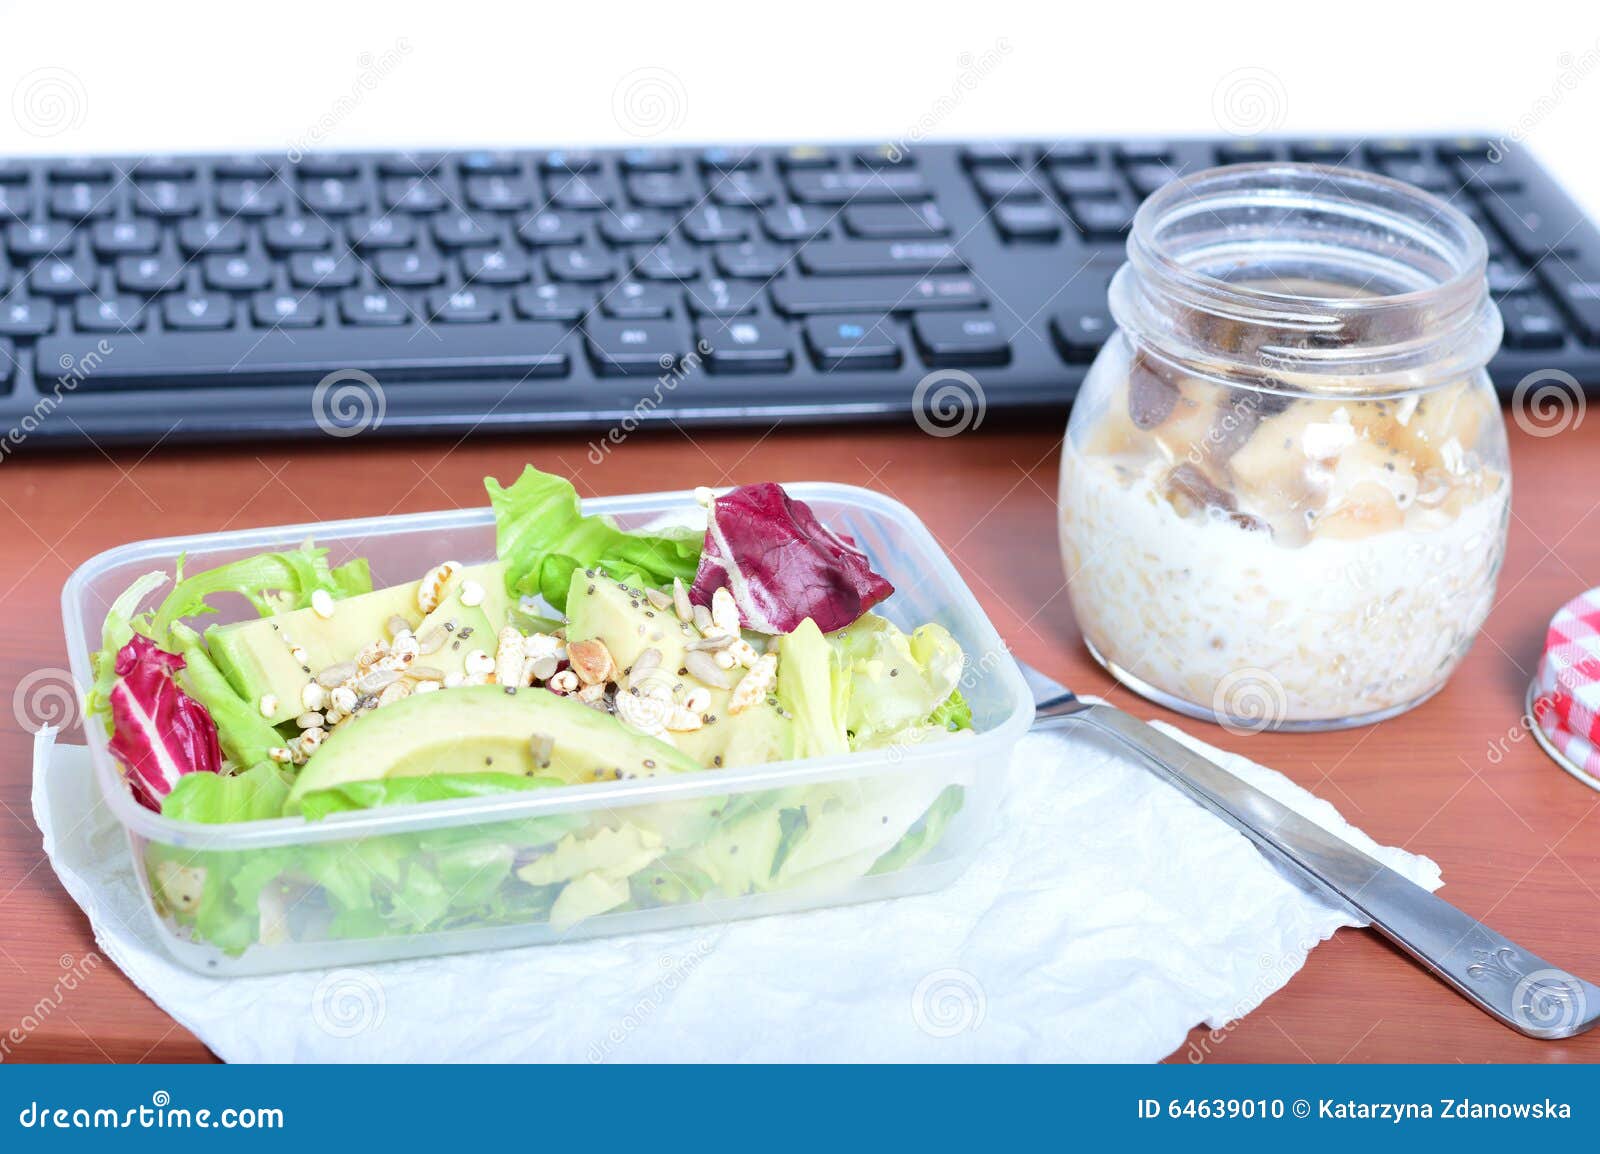 Lunch At Your Desk At Work Healthy Eating Stock Photo Image Of